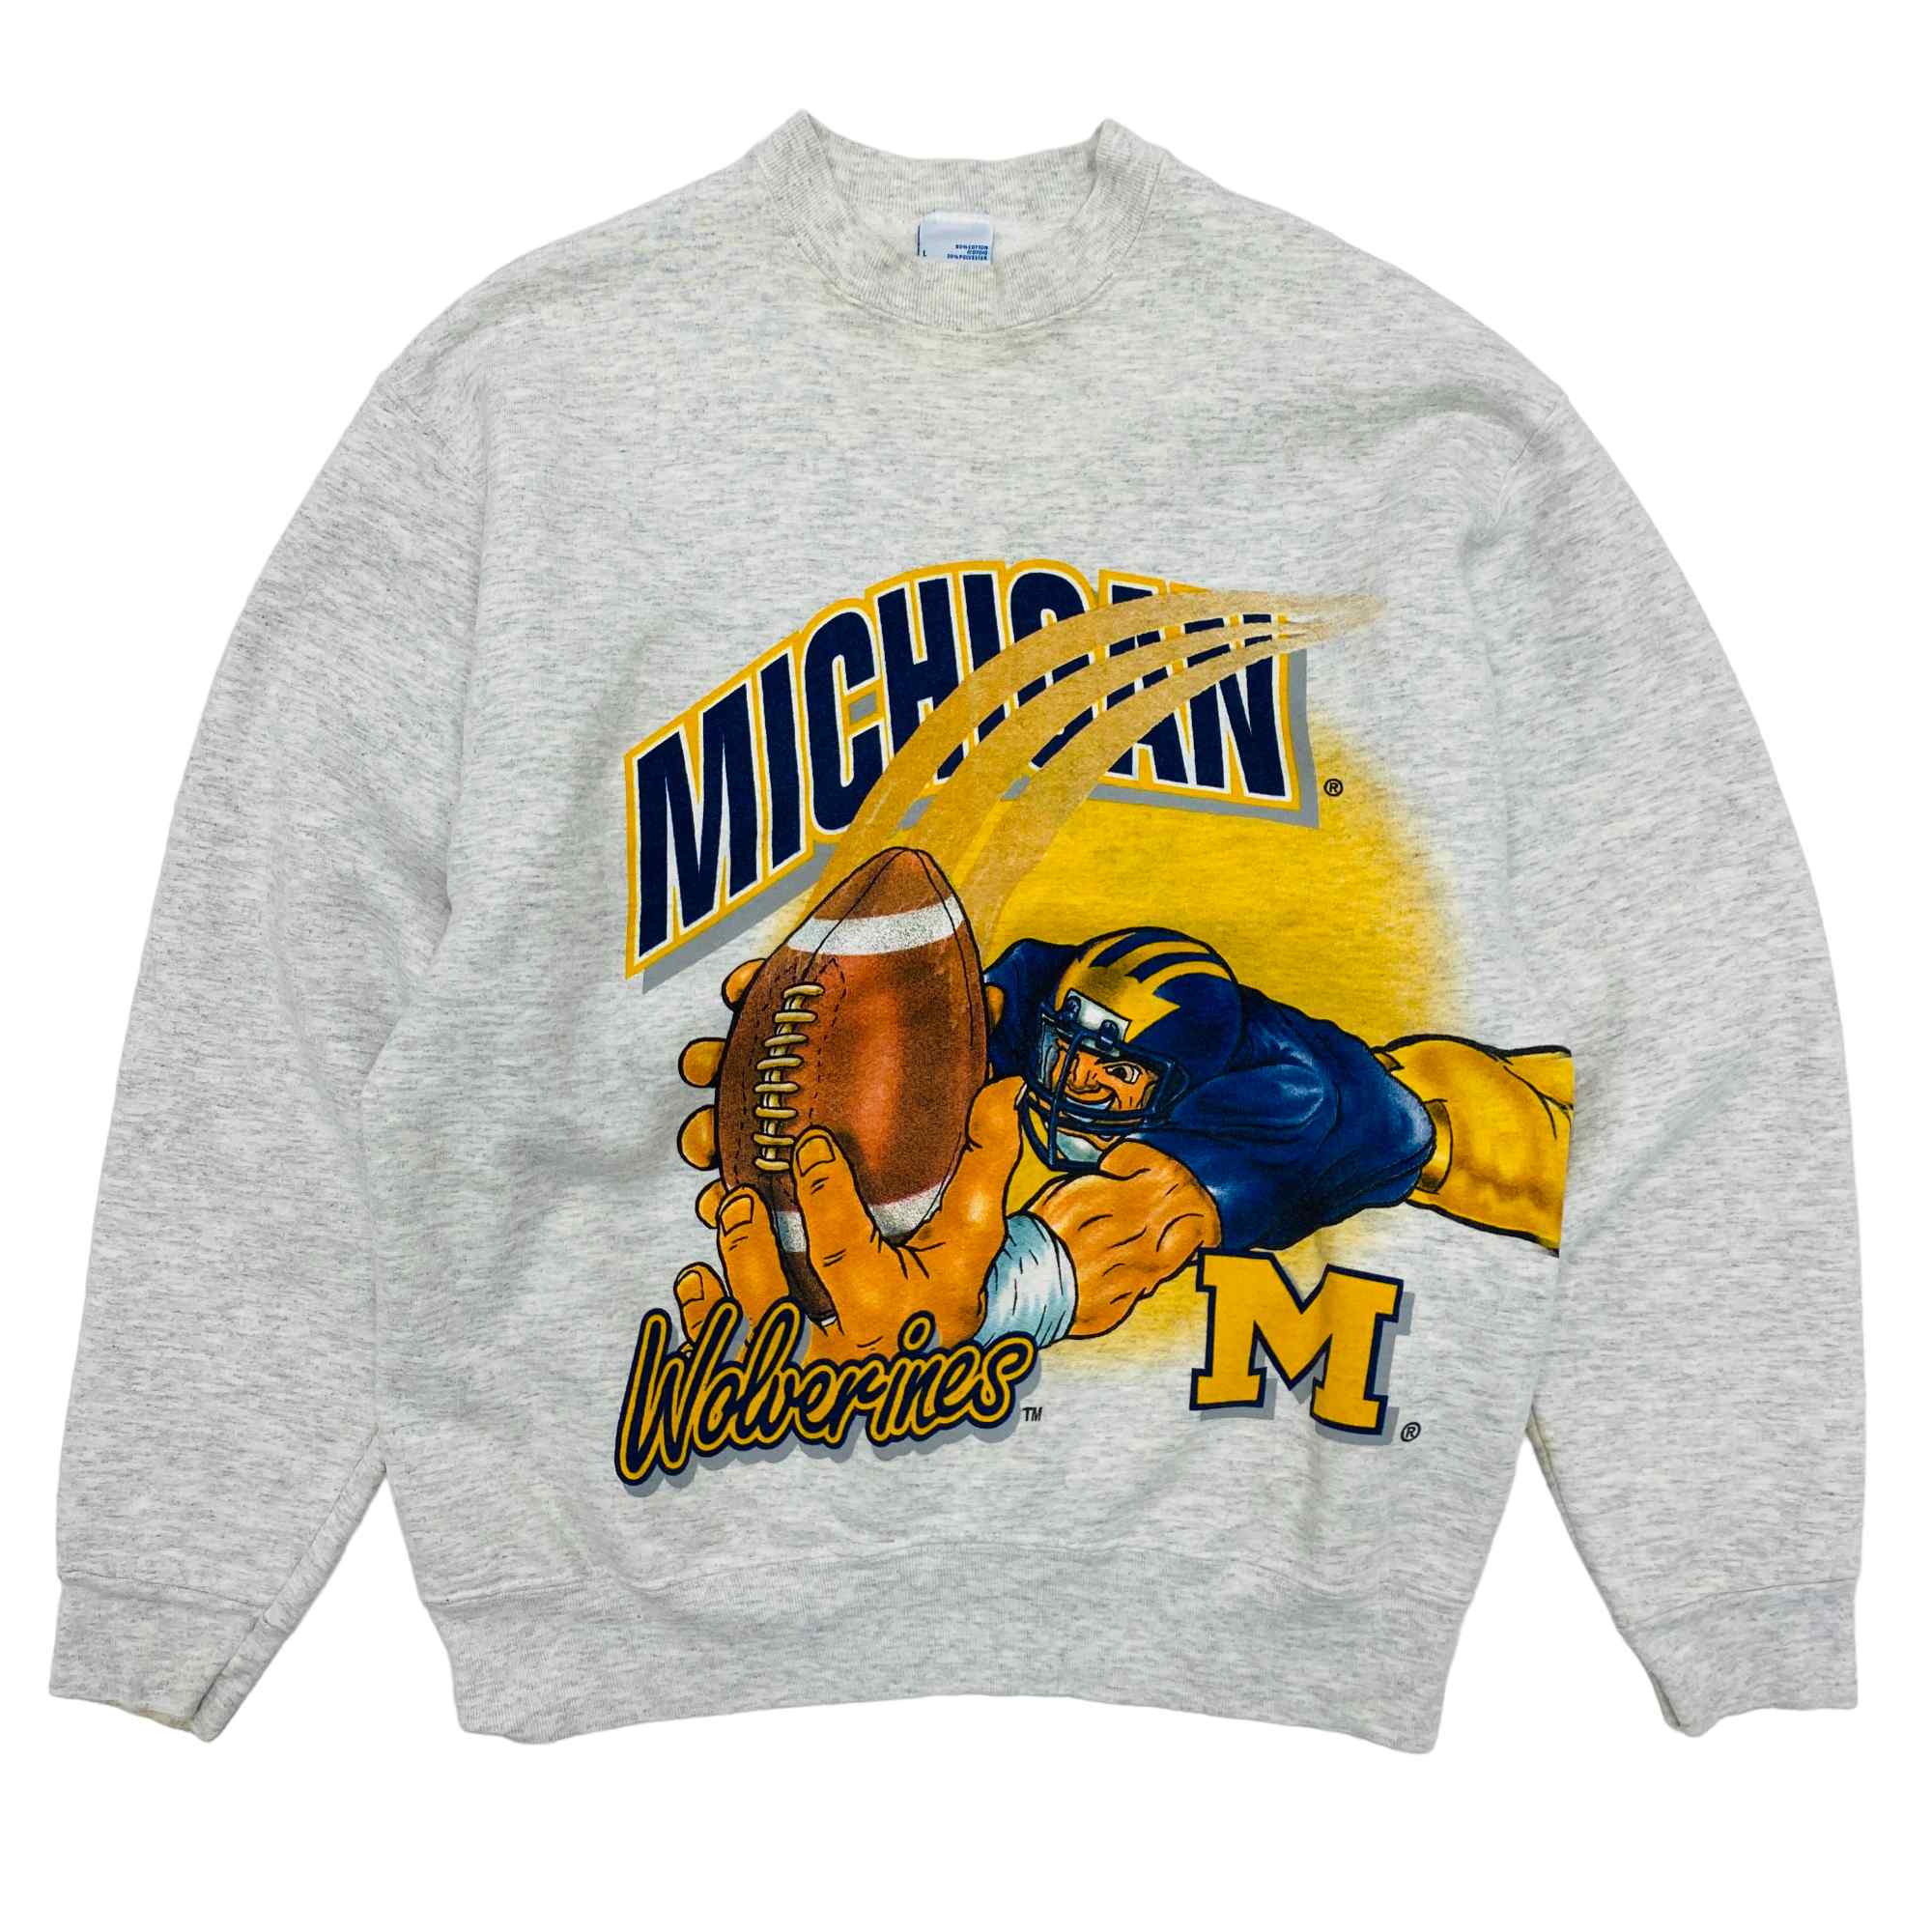 Michigan Wolverines Made In The U.S.A Sweatshirt - Large